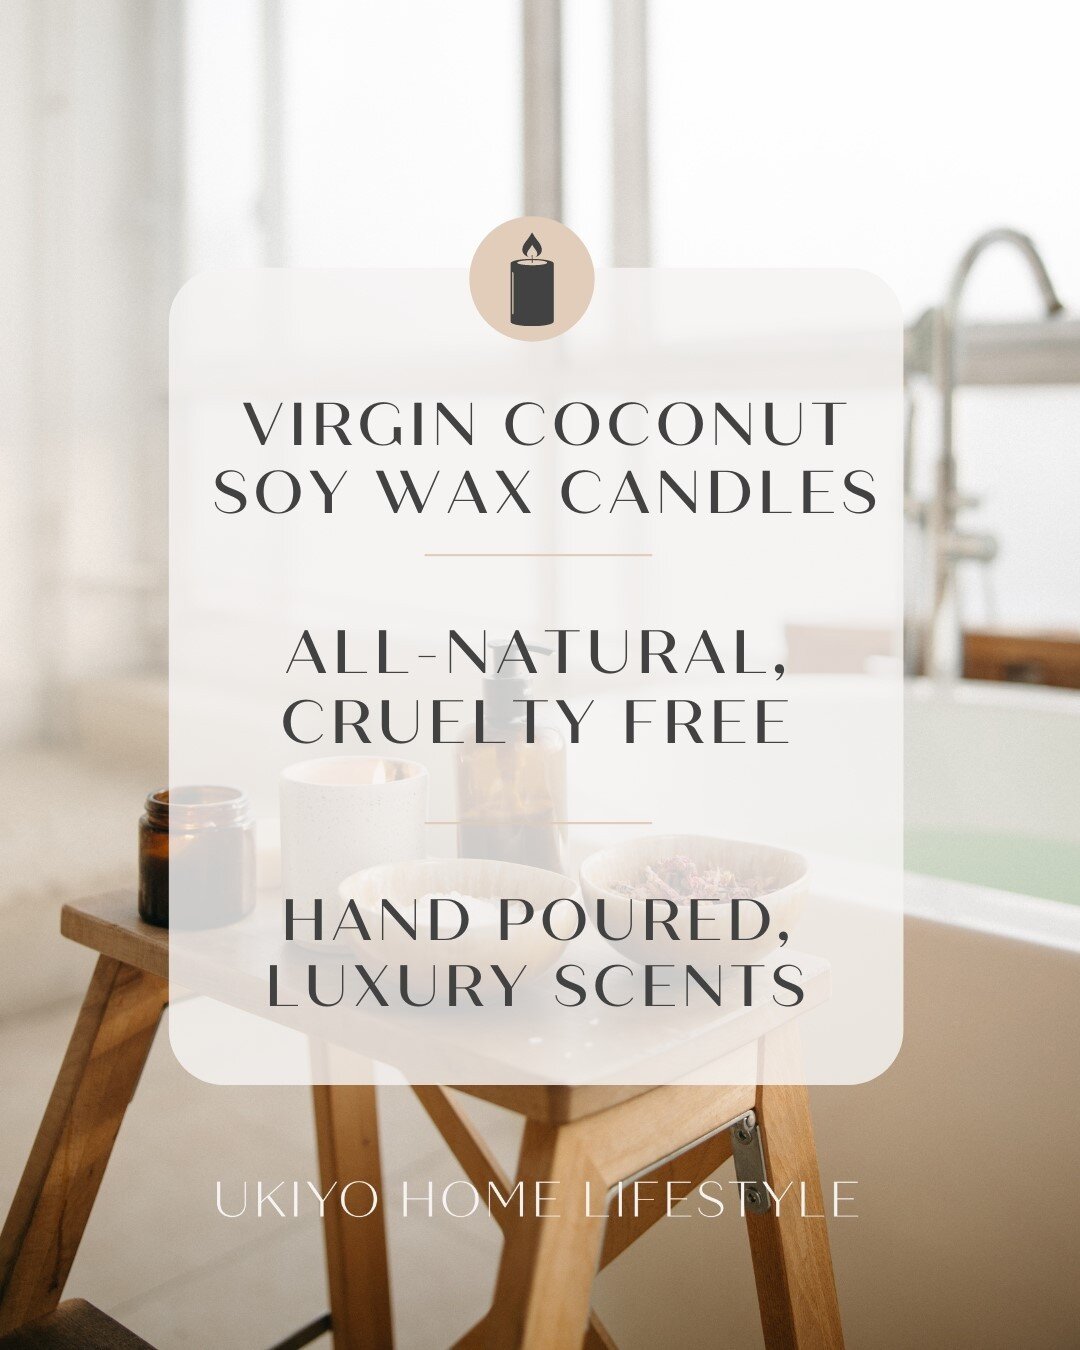 &ldquo;Carry a candle in the dark, be a candle in the dark, know that you&rsquo;re a flame in the dark.&rdquo; - Ivan Illich

Created with meaning, heart, and passion for the craft, we're delivering eco-friendly, cruelty-free and all-natural luxury s